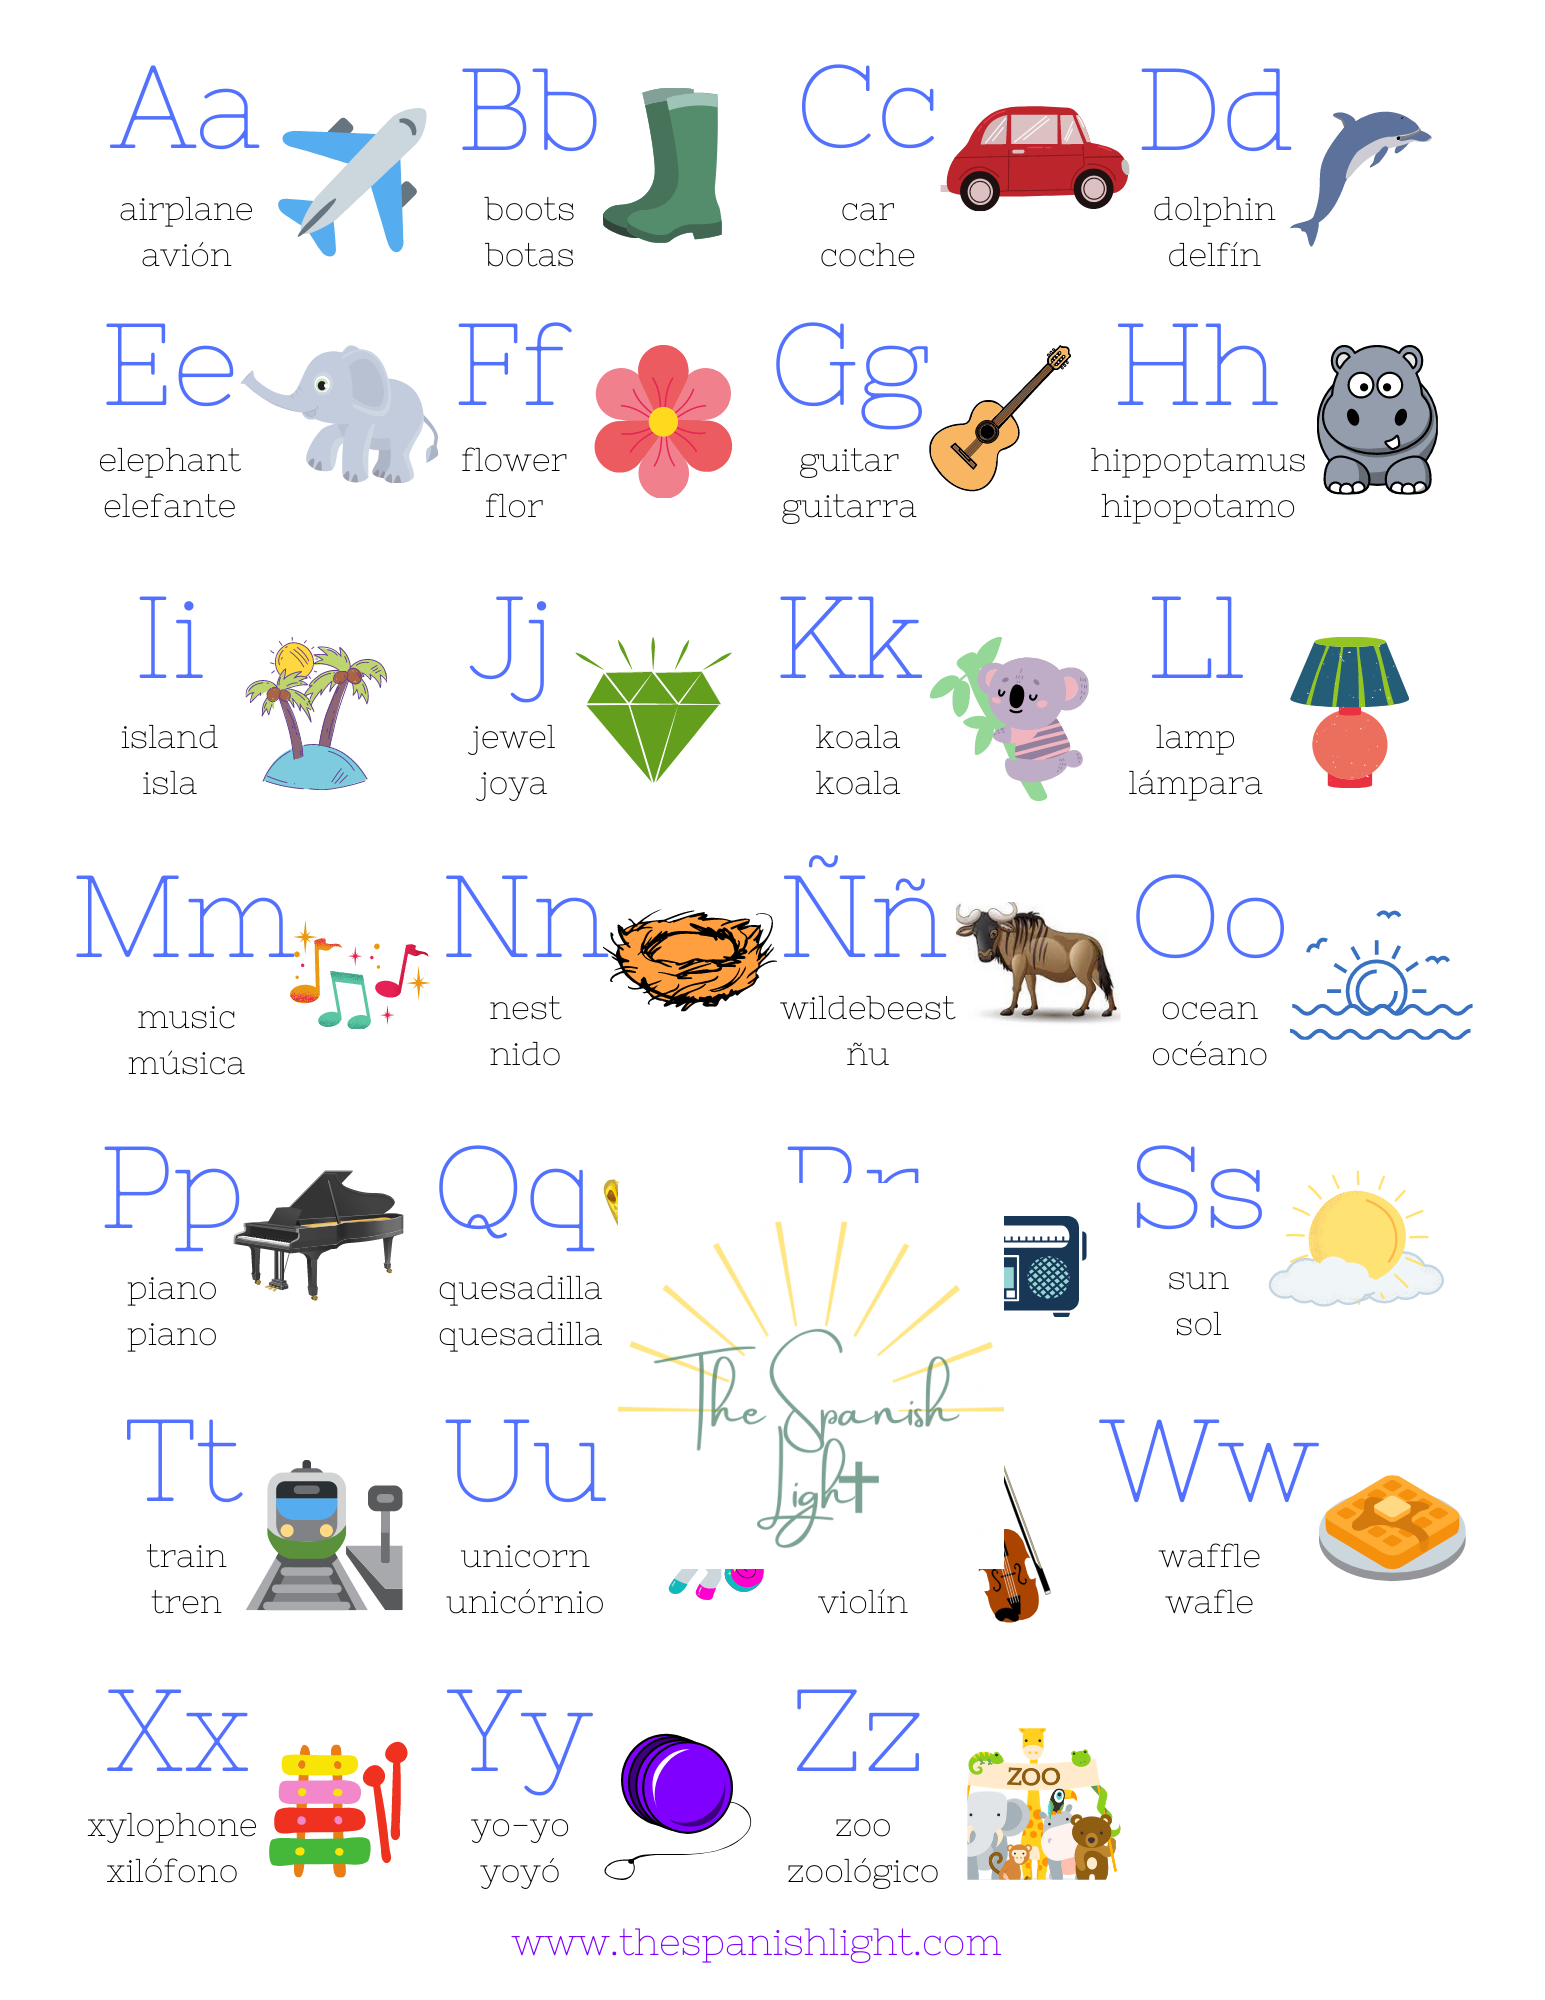 Alphabet Poster in Spanish and English